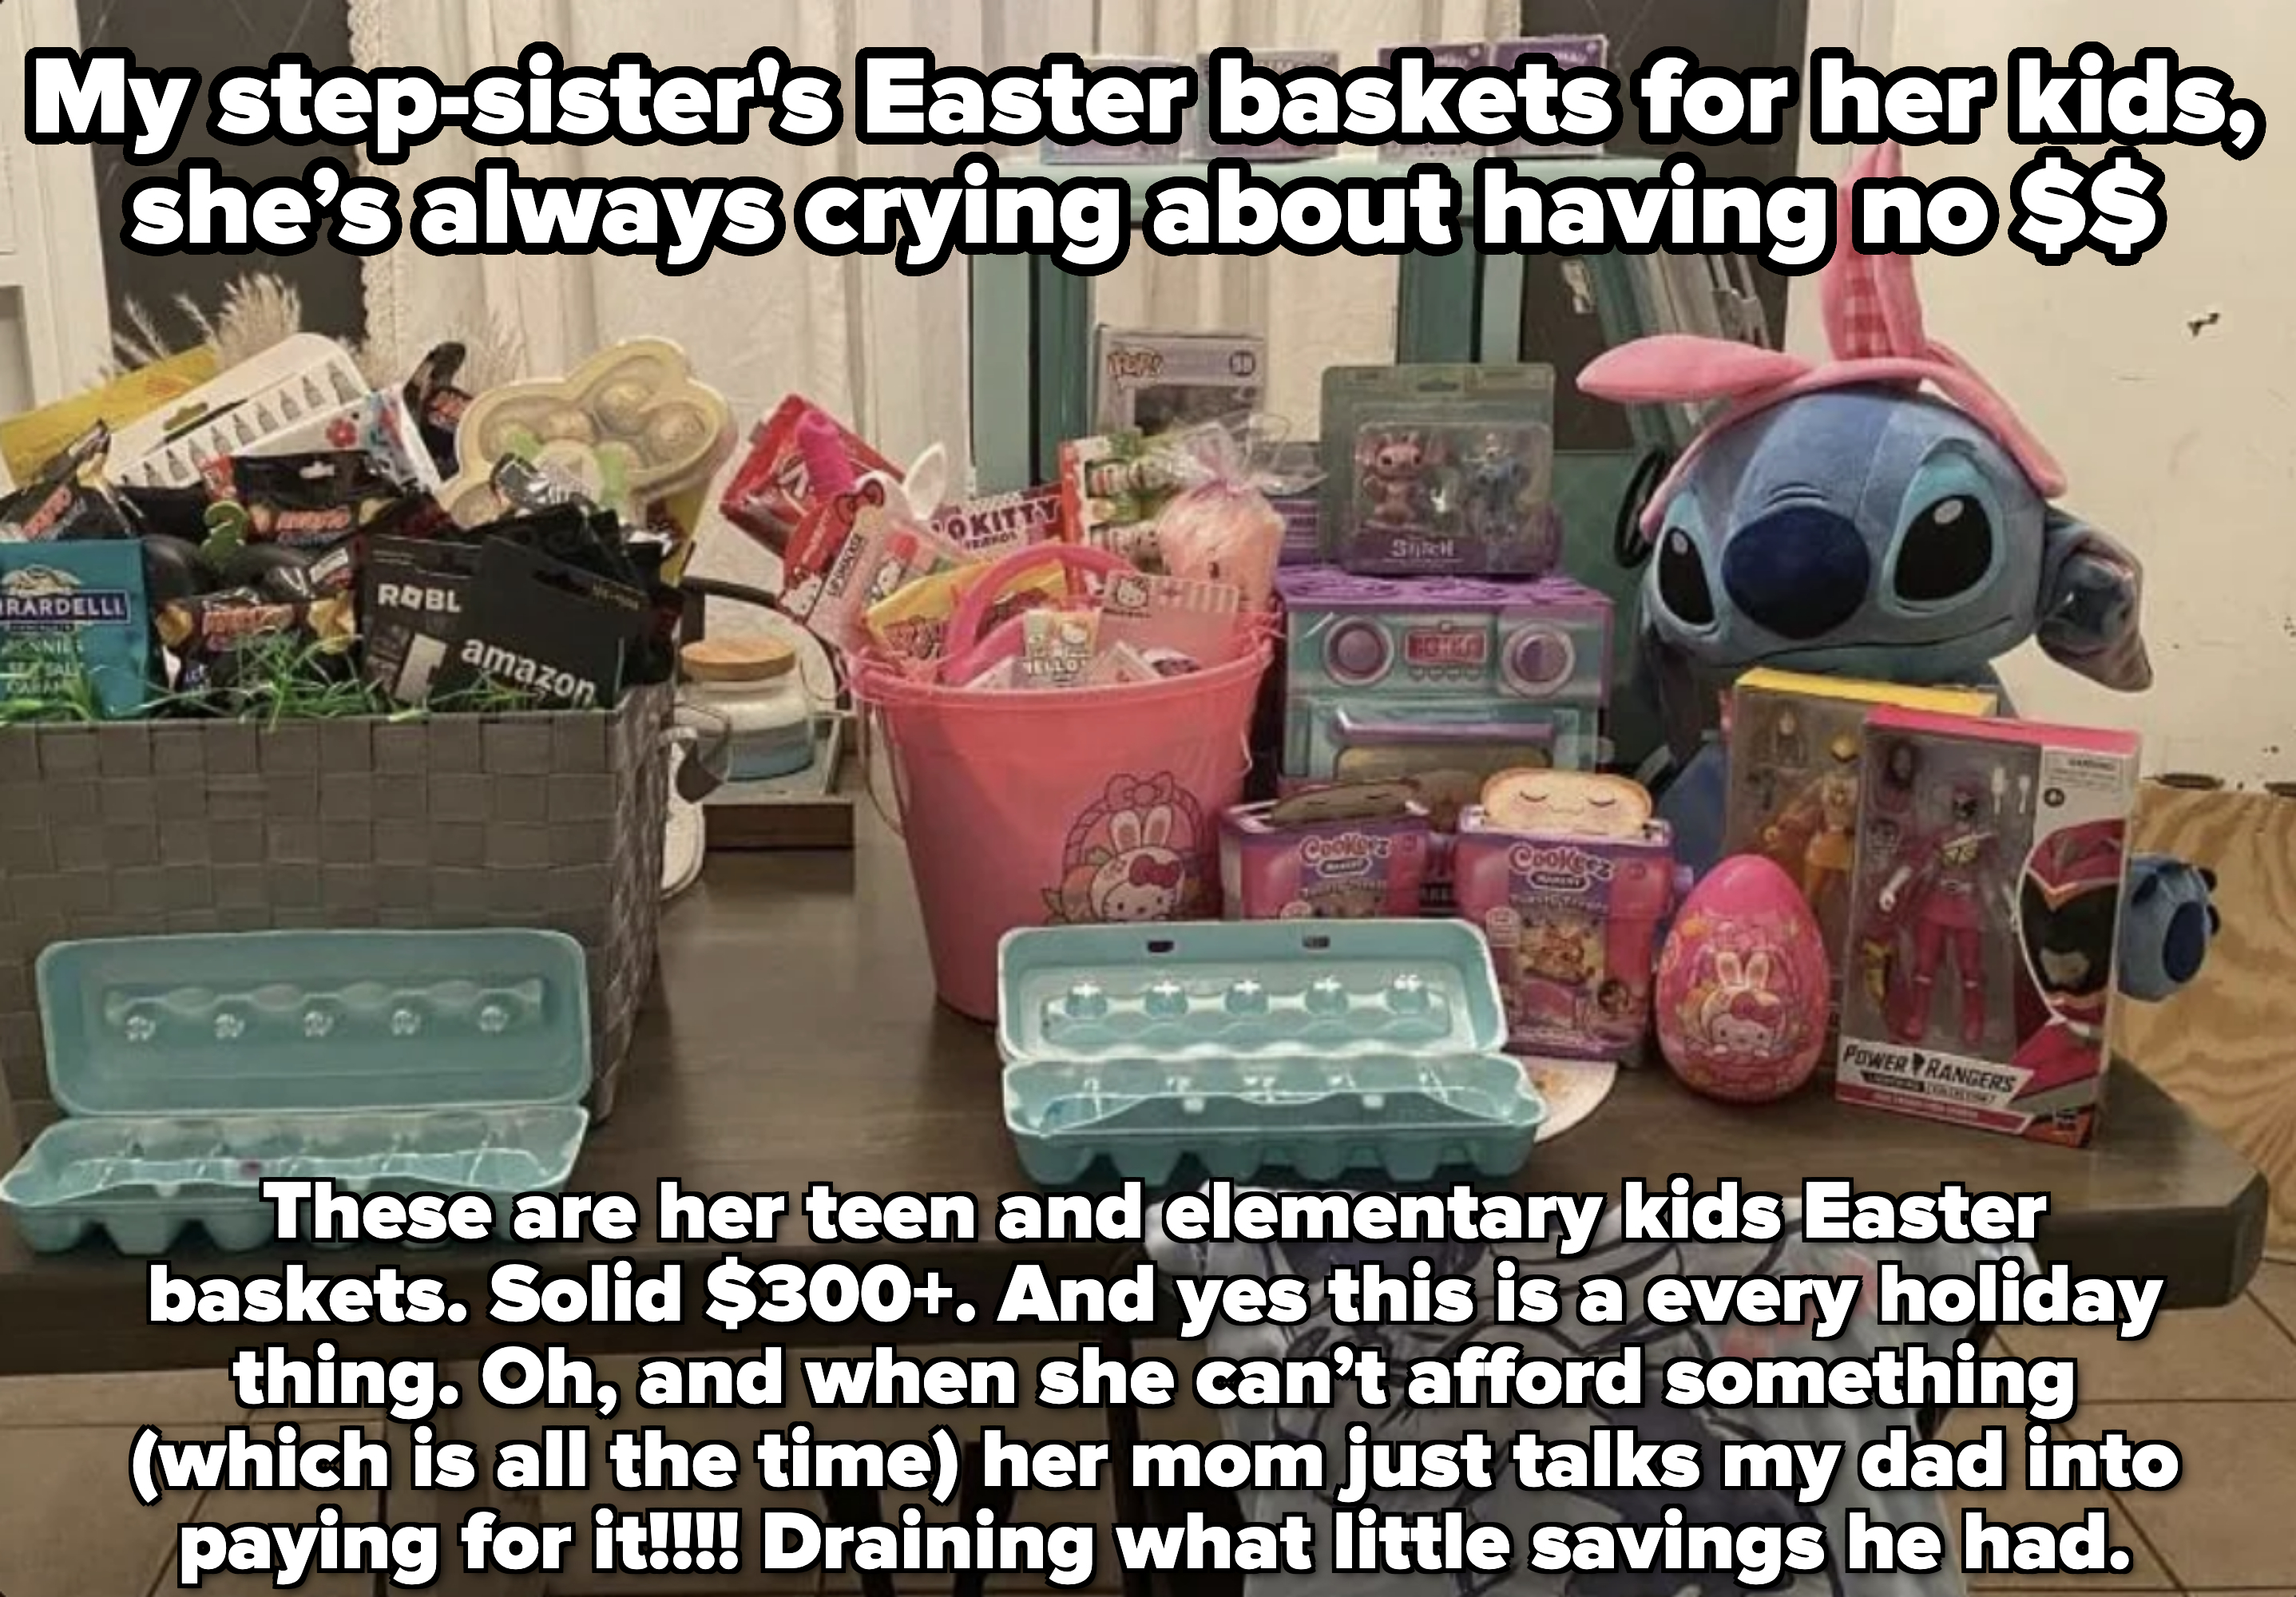 A table with various toys and items including a Stitch plush, egg cartons, and children&#x27;s products saying this is what OP&#x27;s step-sister gets her kids for easter, then complains about having no money/asks for money